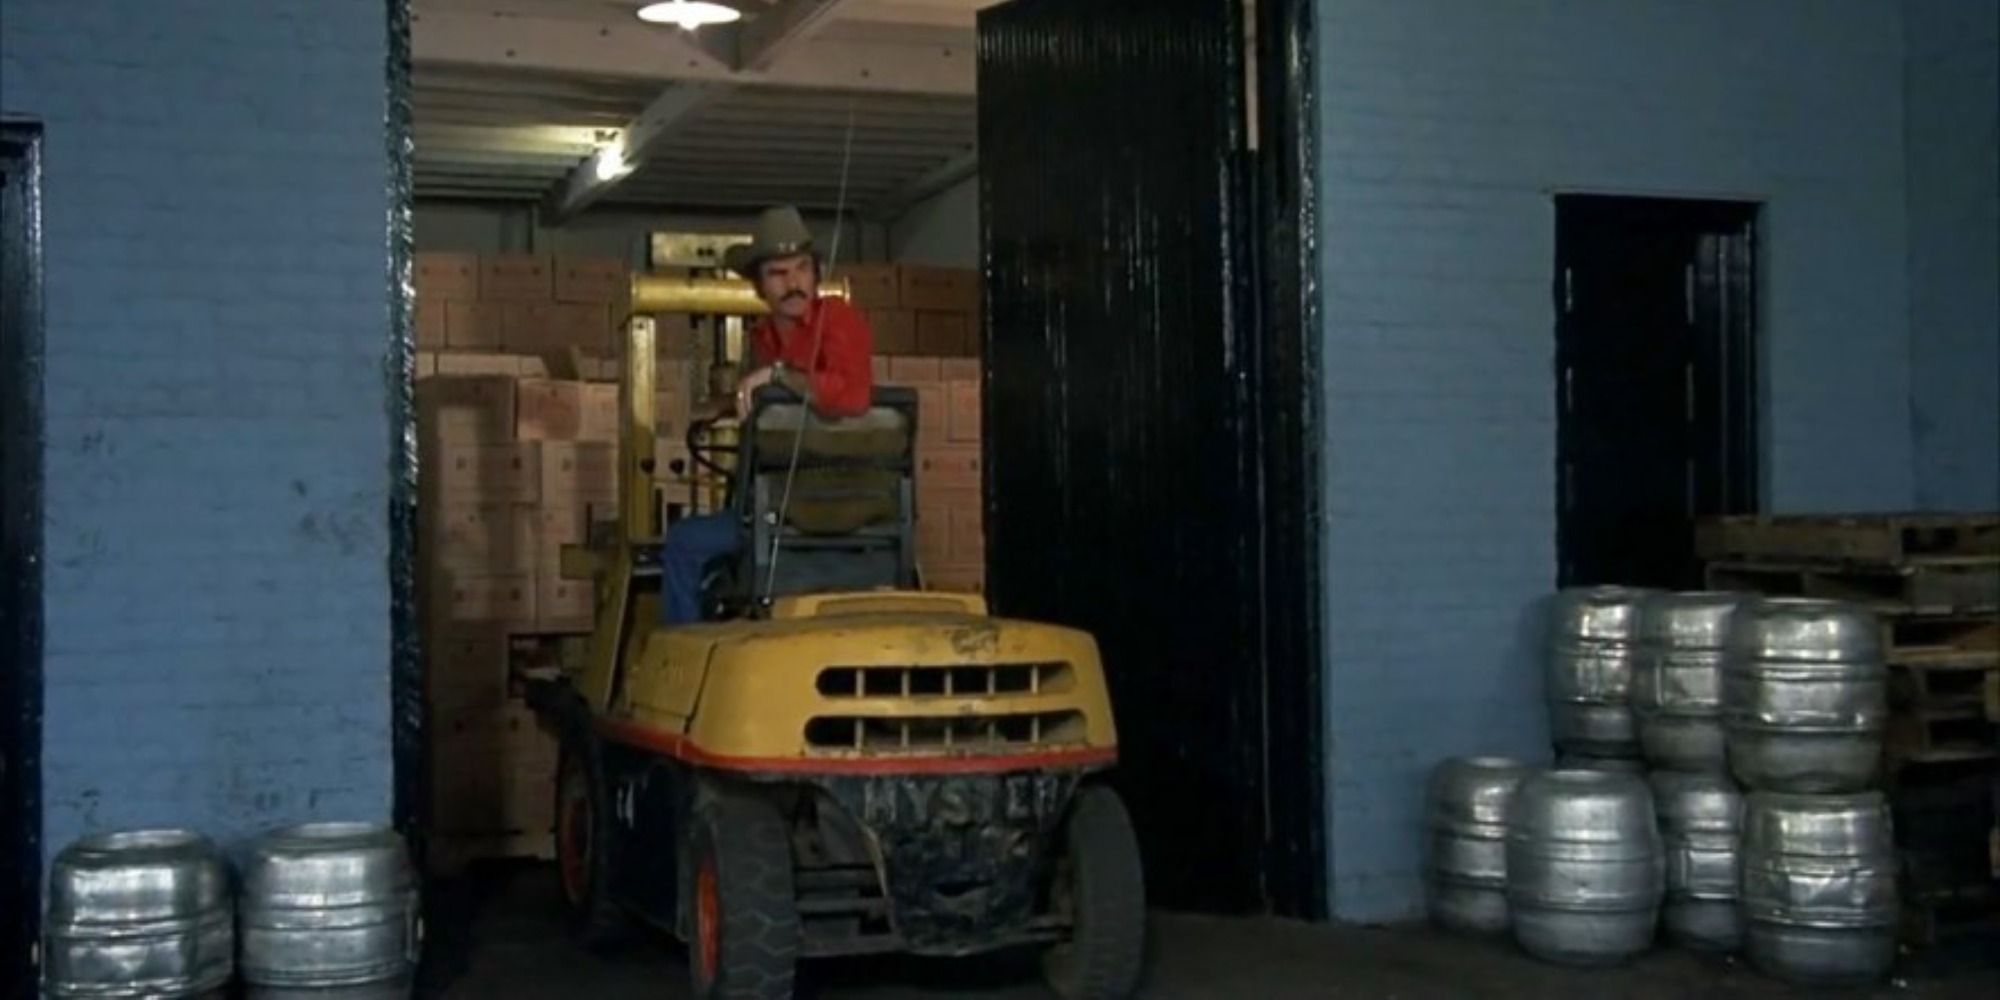 Bandit riding a forklift in Smokey and the Bandit